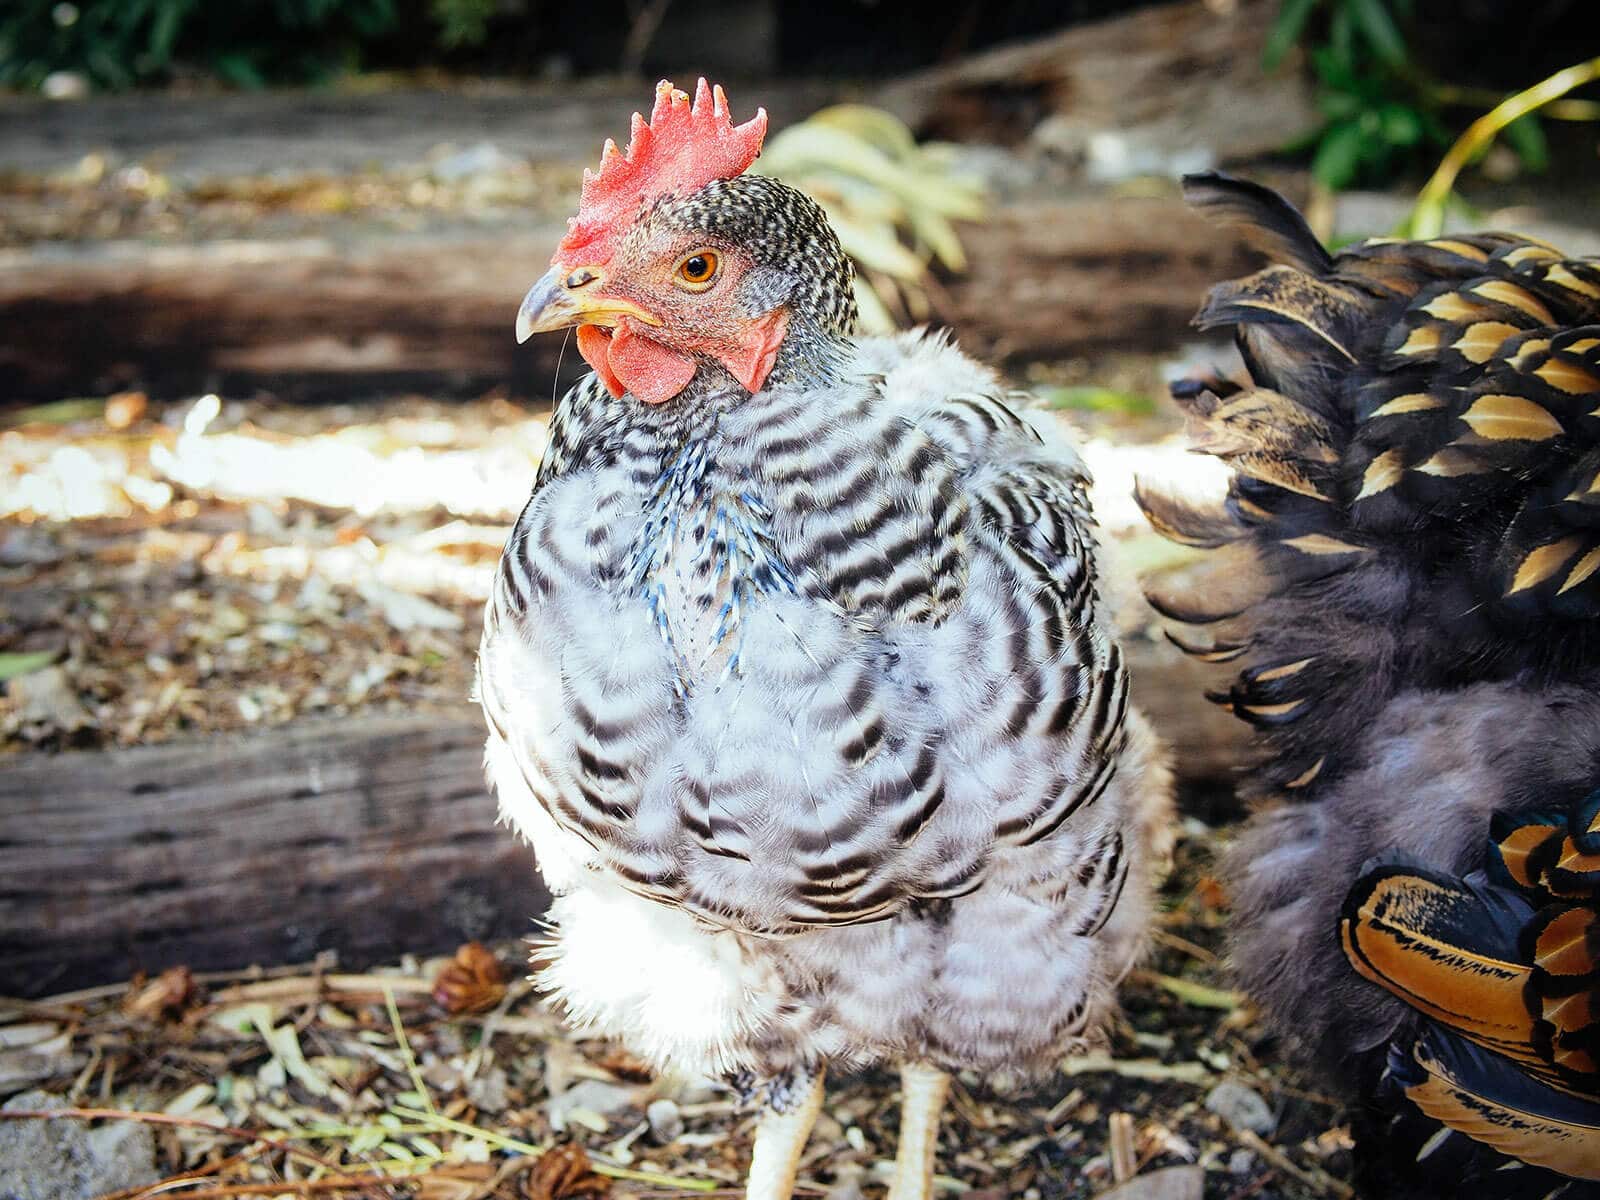 Barred Rock with new feathers growing out on her chest